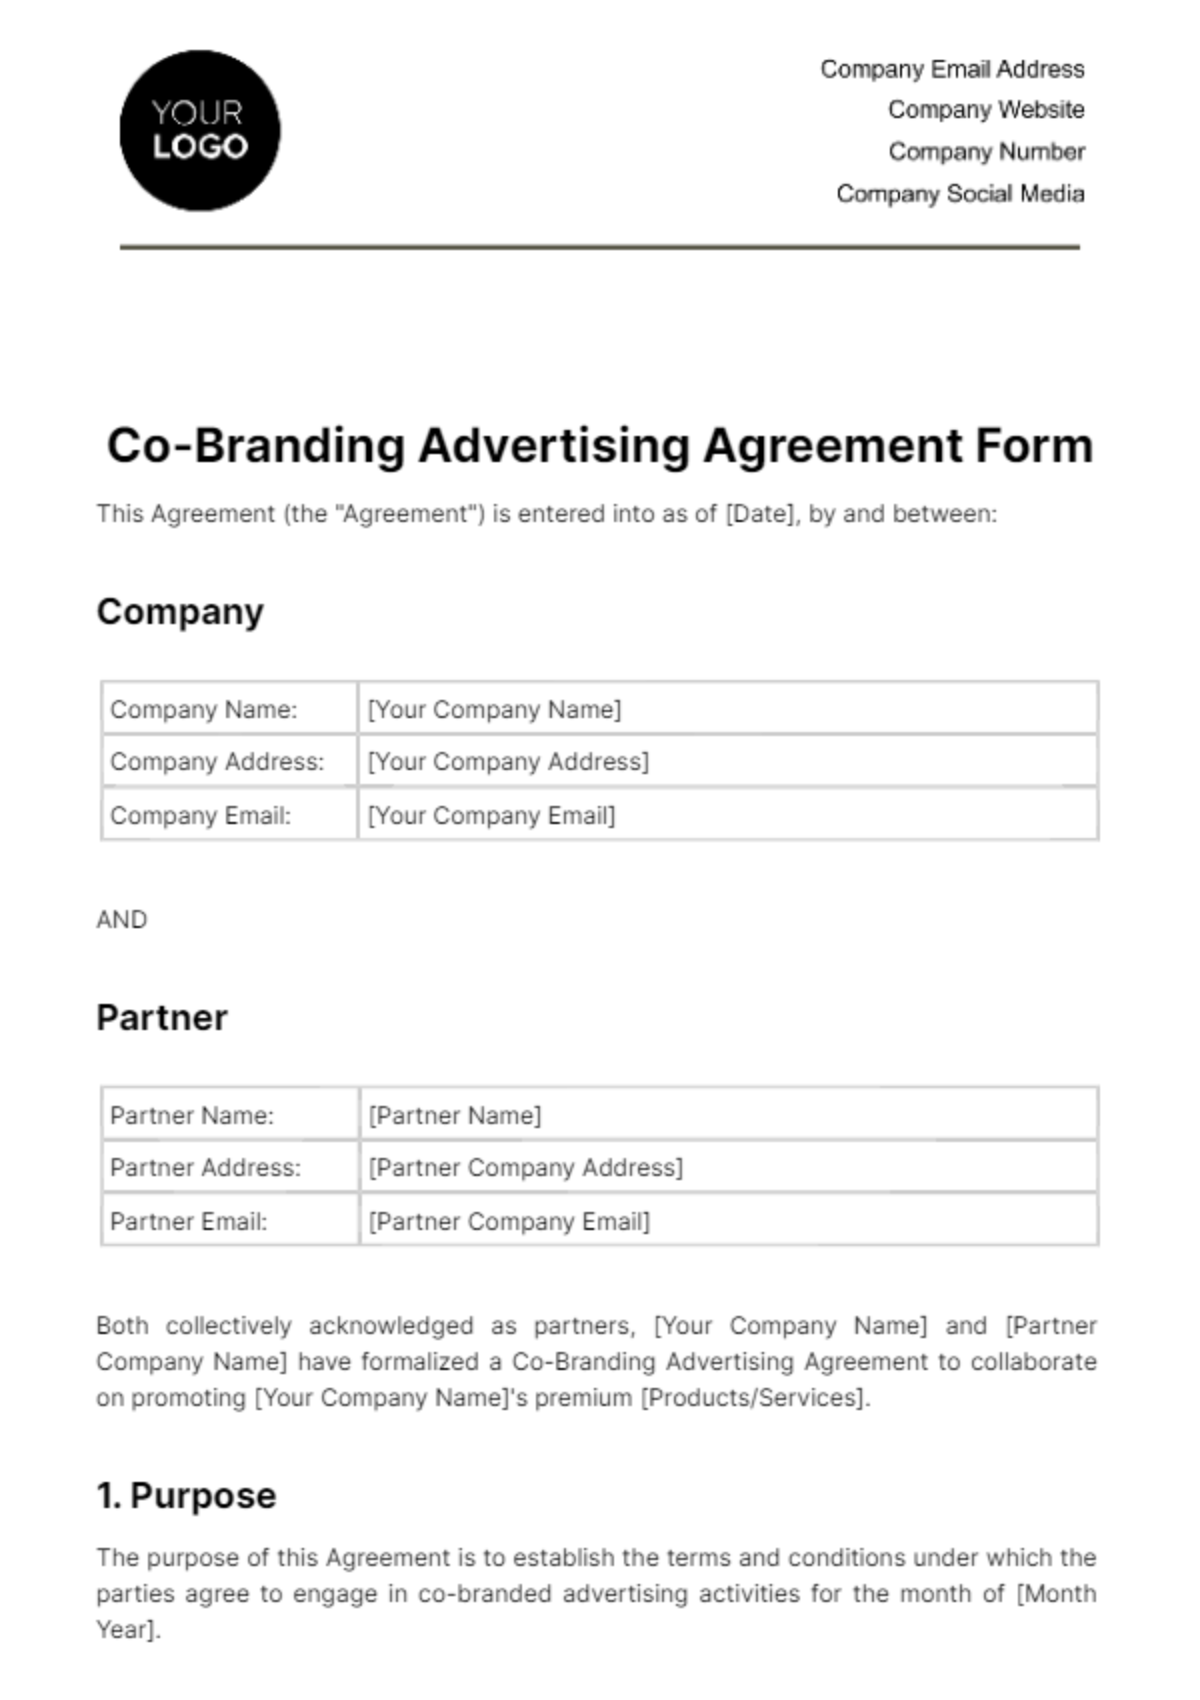 Co-Branding Advertising Agreement Form Template